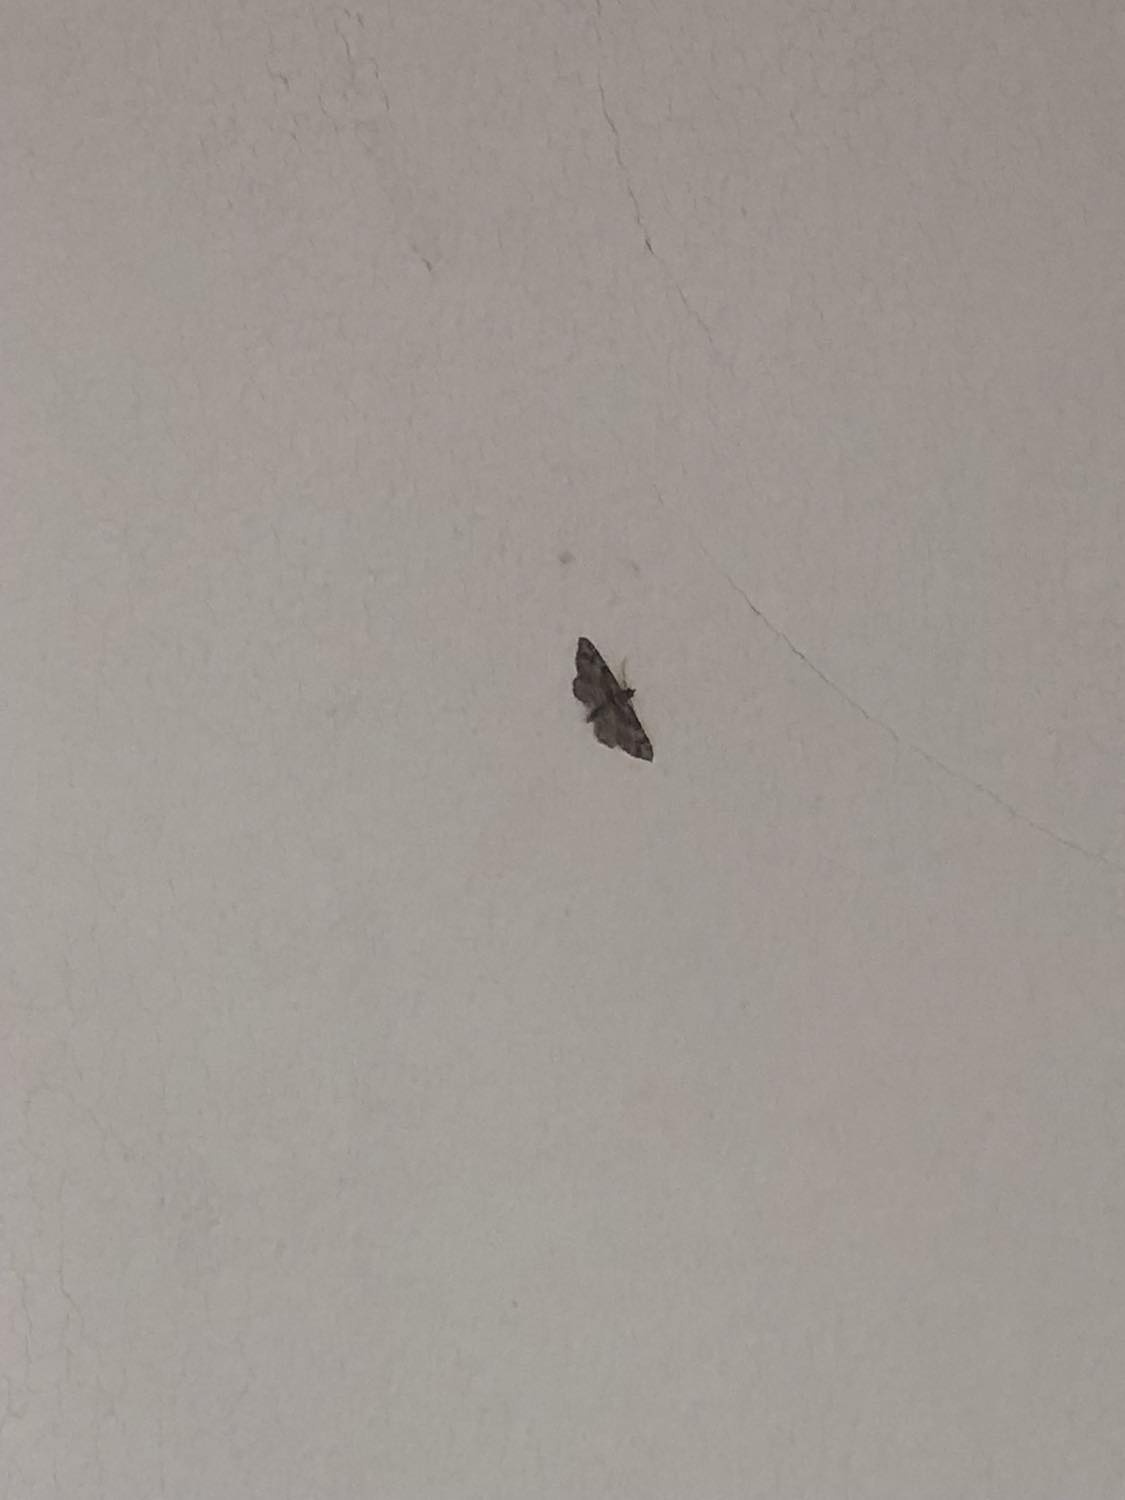 Another little moth resting on the wall across the room from the first